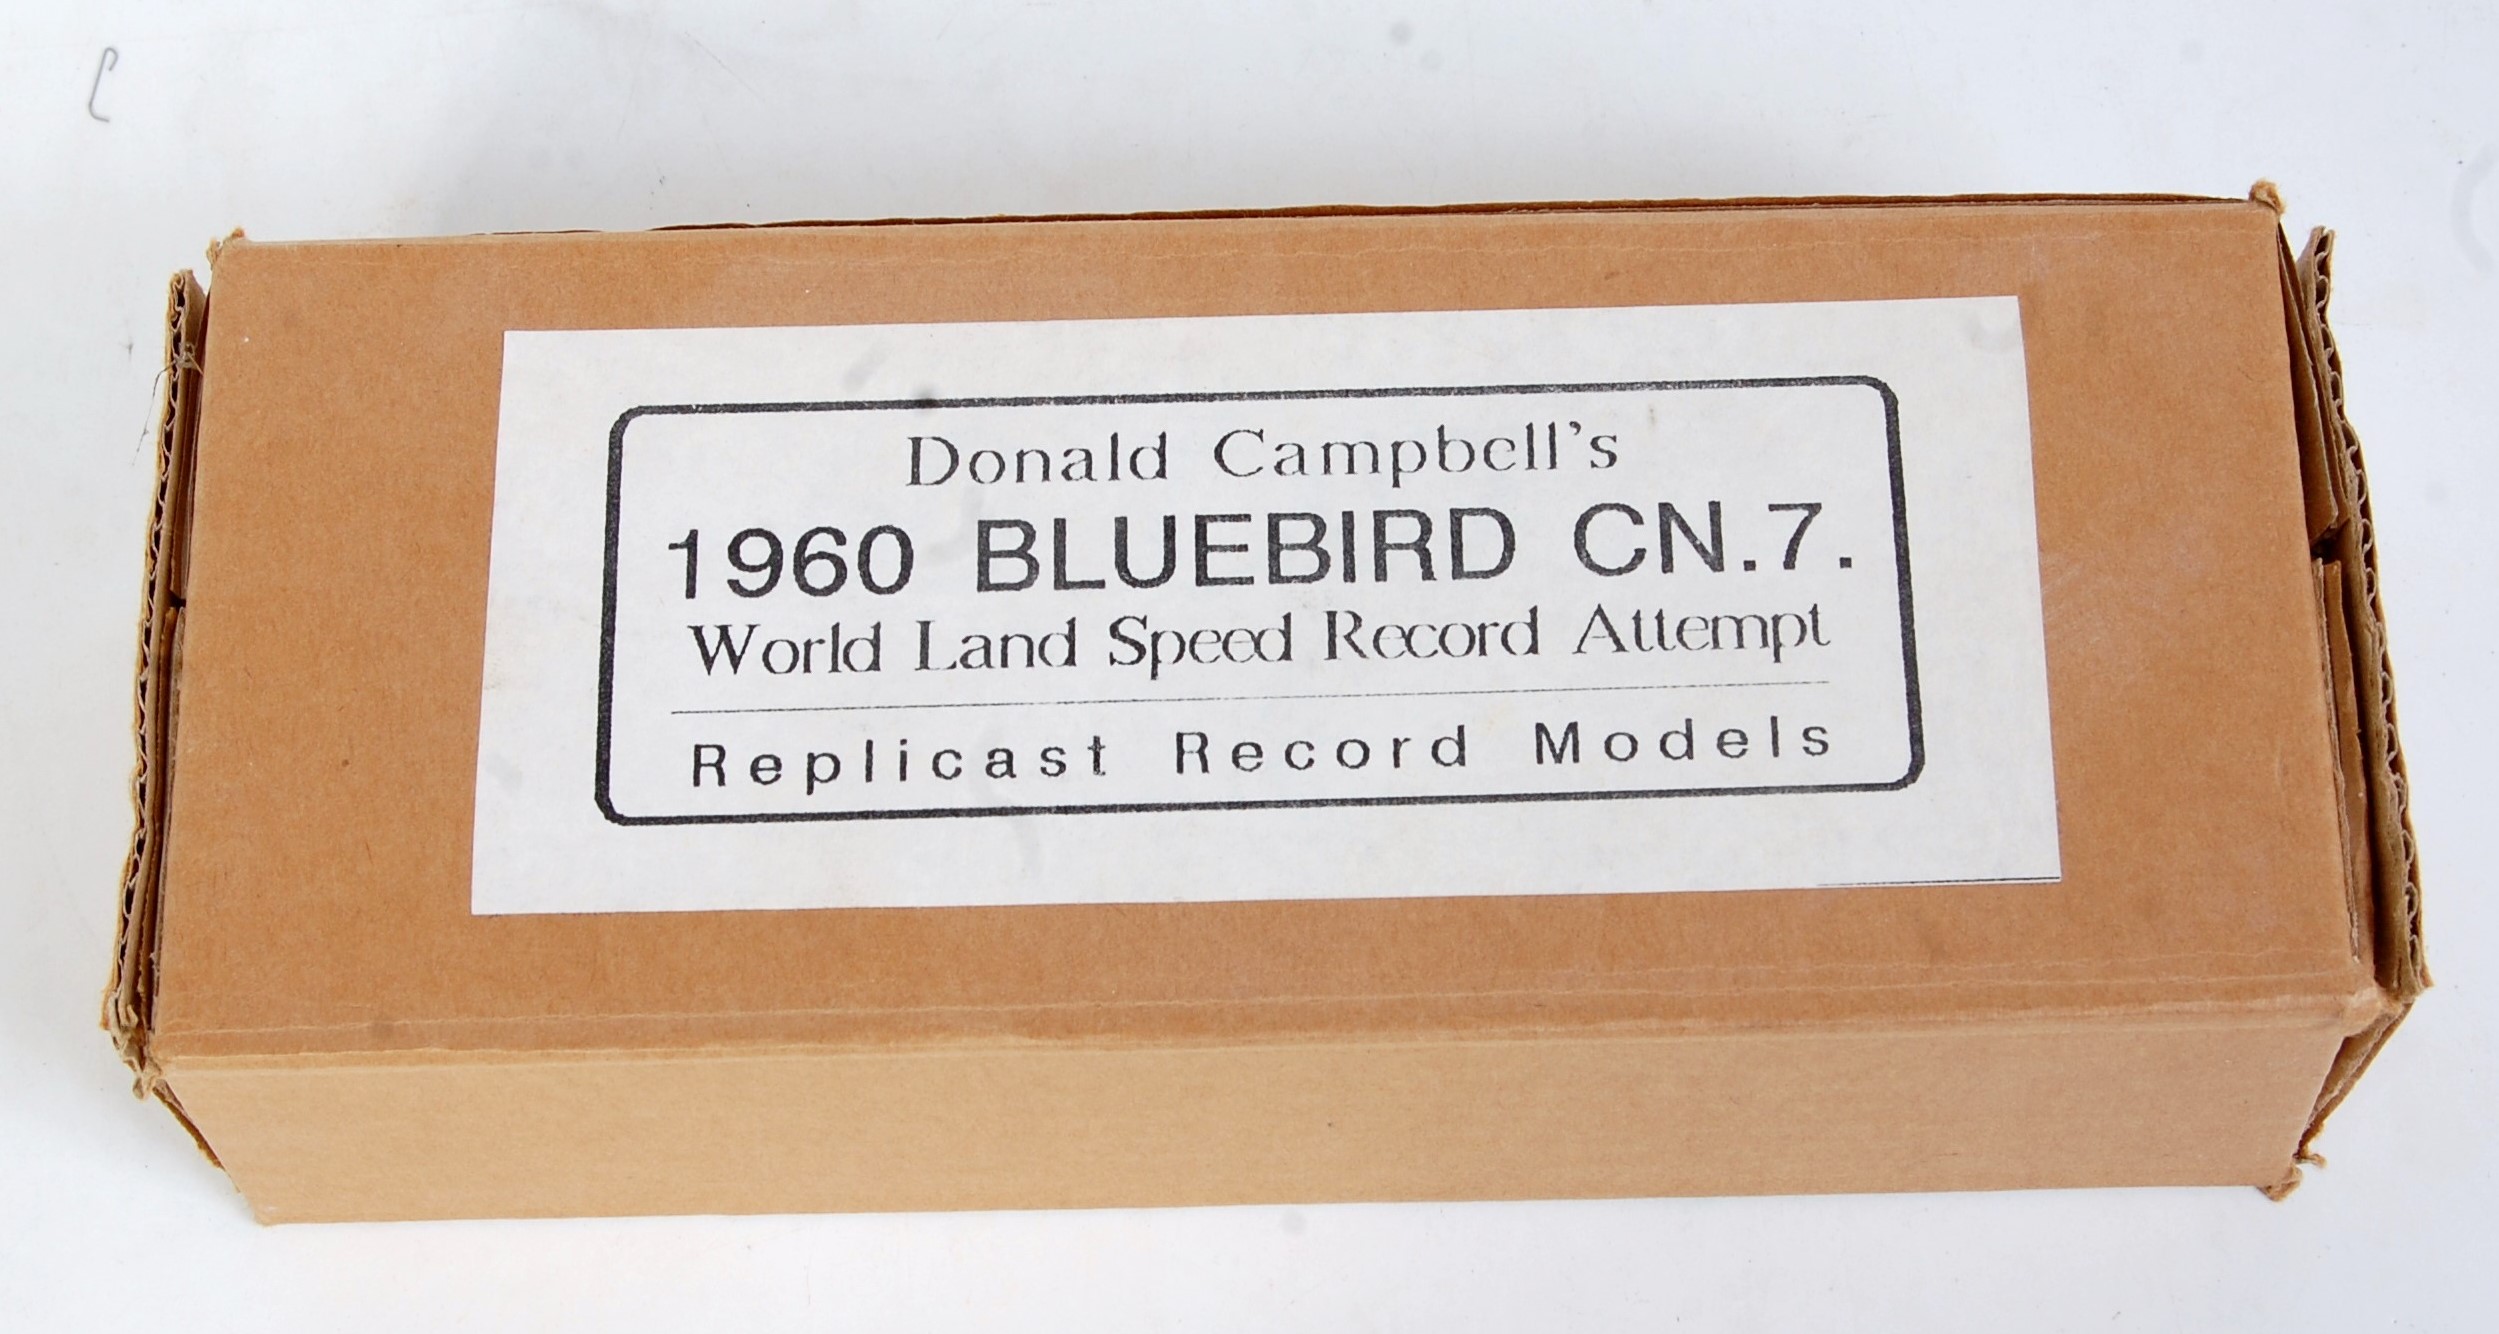 A Replicast Record Models resin kit for a Donald Campbell's 1960 Bluebird CN7 World Landspeed record